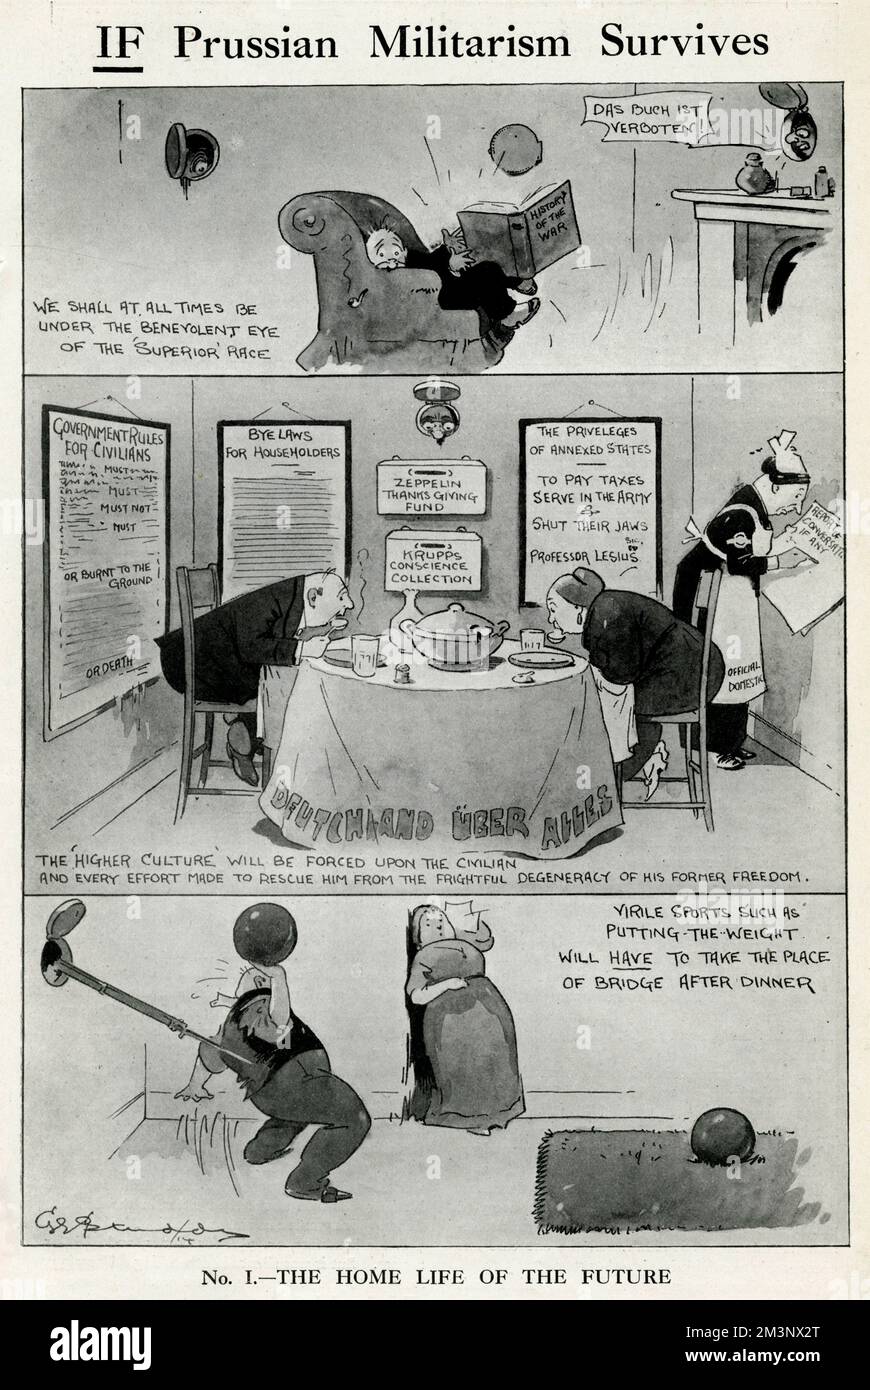 Cartoons, IF Prussian Militarism Survives.  Showing what the home life of the future might be if the Prussians win the First World War.  Under the new totalitarian system people are spied on, certain books are banned, there are endless rules and regulations, and a quiet game of bridge after dinner is replaced with the more strenuous athletic activity of putting the weight.       Date: October 1914 Stock Photo